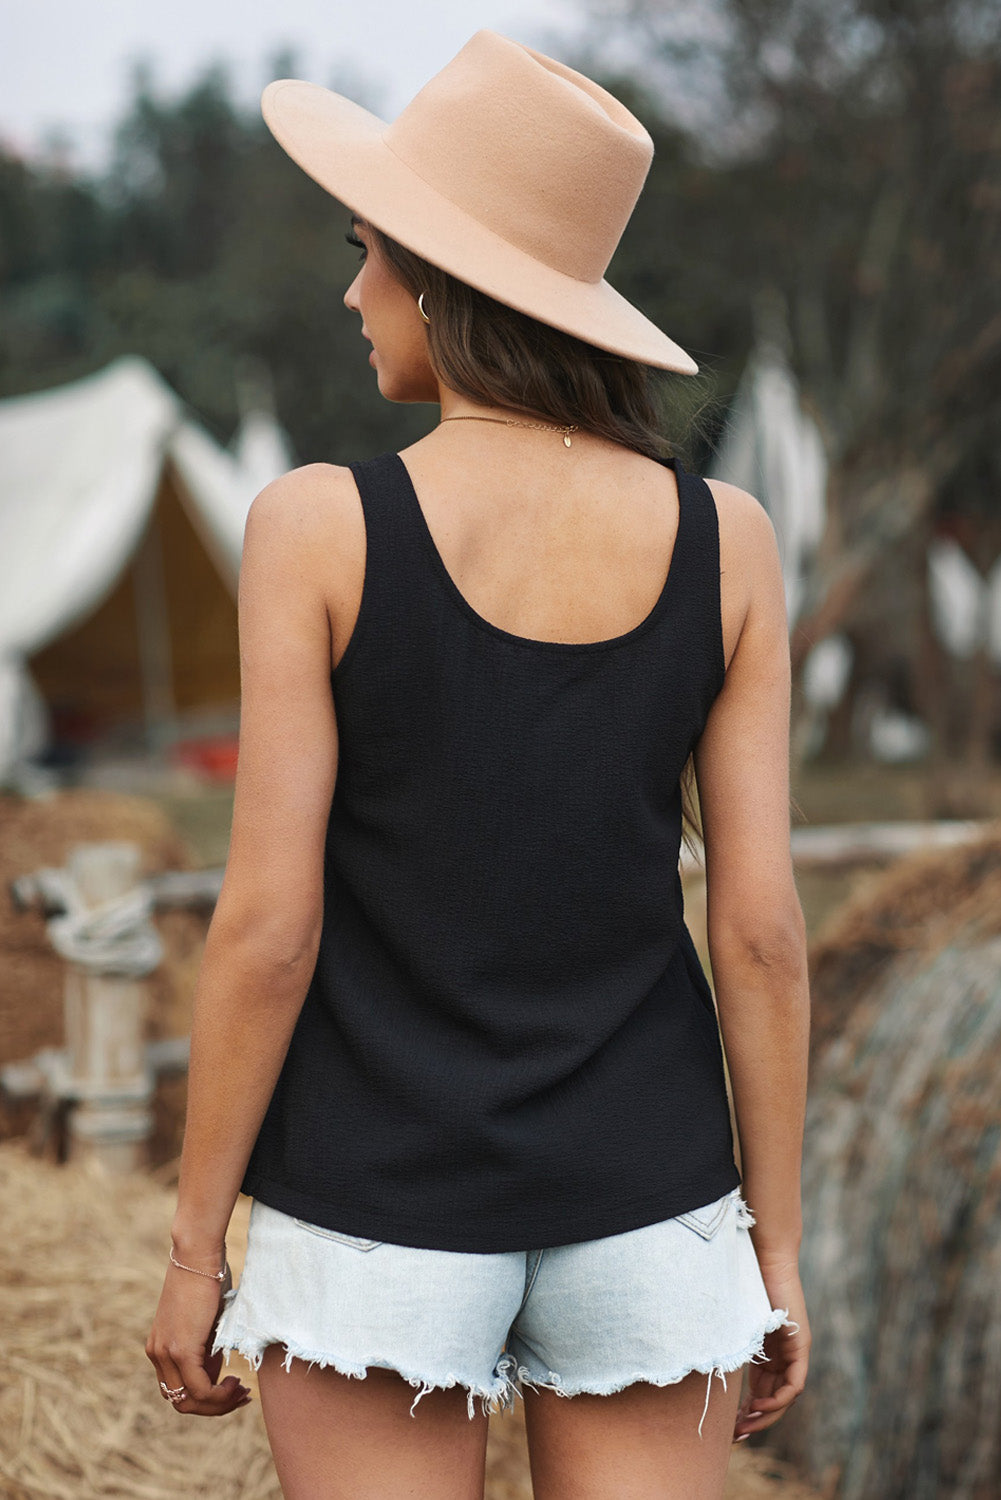 Versatile Scoop Neck Tank with stylish button front, available in black & white. Perfect blend of elegance and comfort for any occasion.